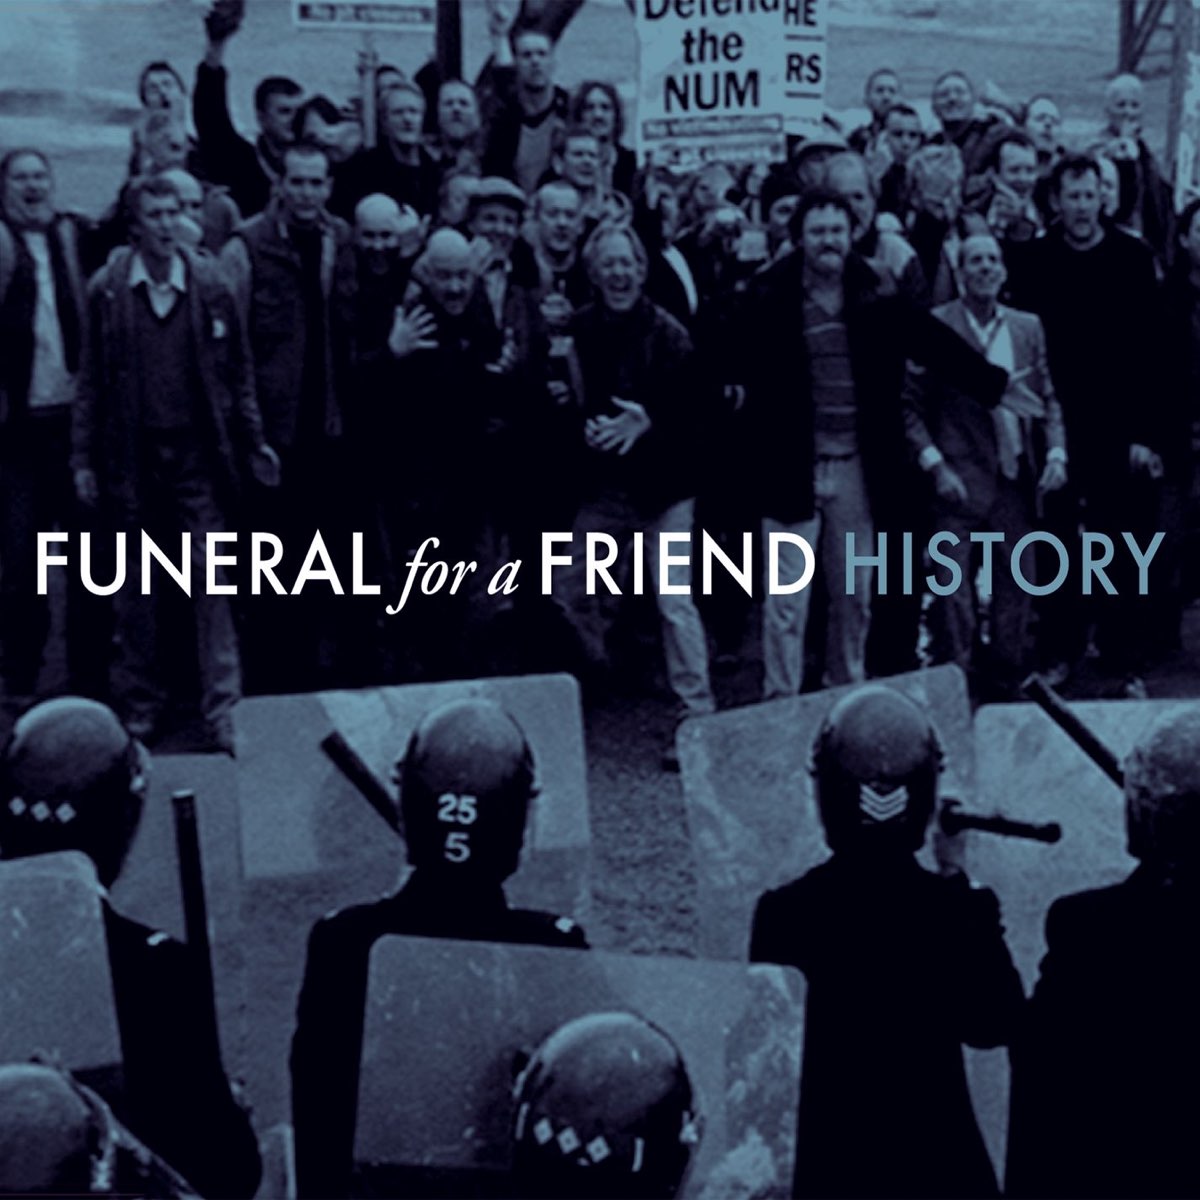 Funeral song перевод. Funeral for a friend. Funeral for a friend 2005. Funeral for a friend hours. Funeral for a friend альбомы.